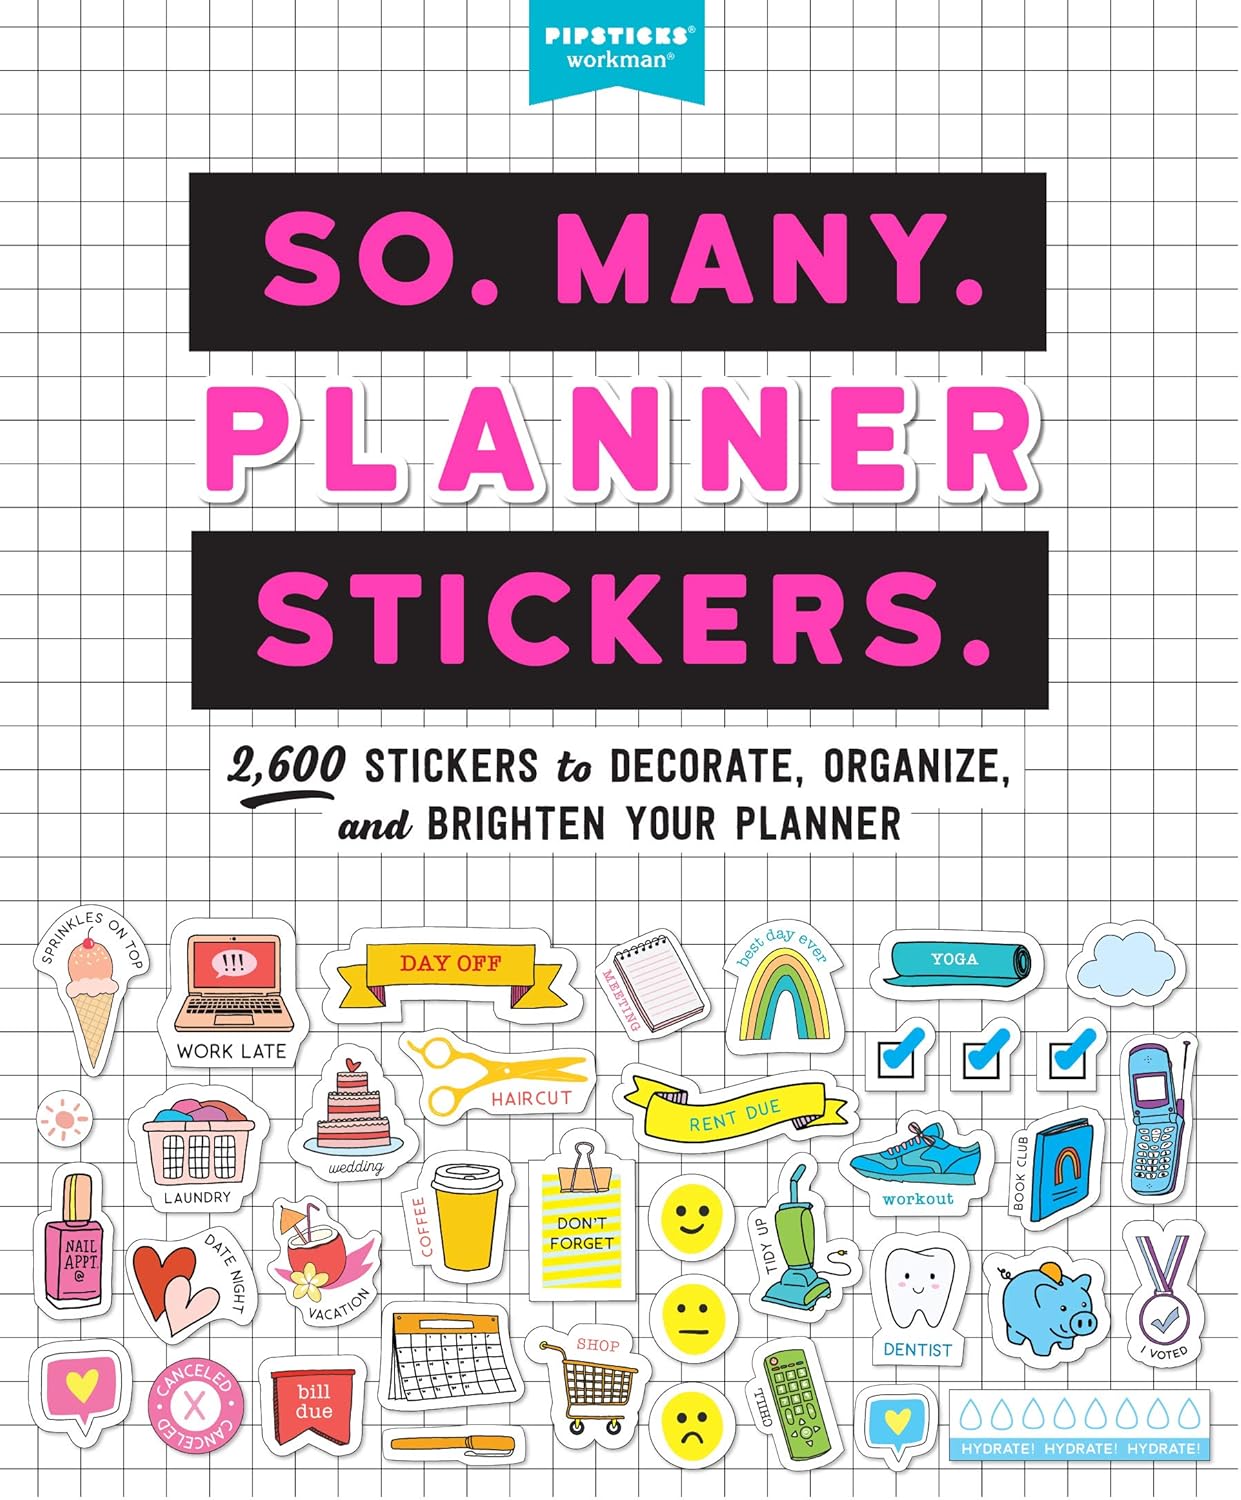 So. Many. Planner Stickers.